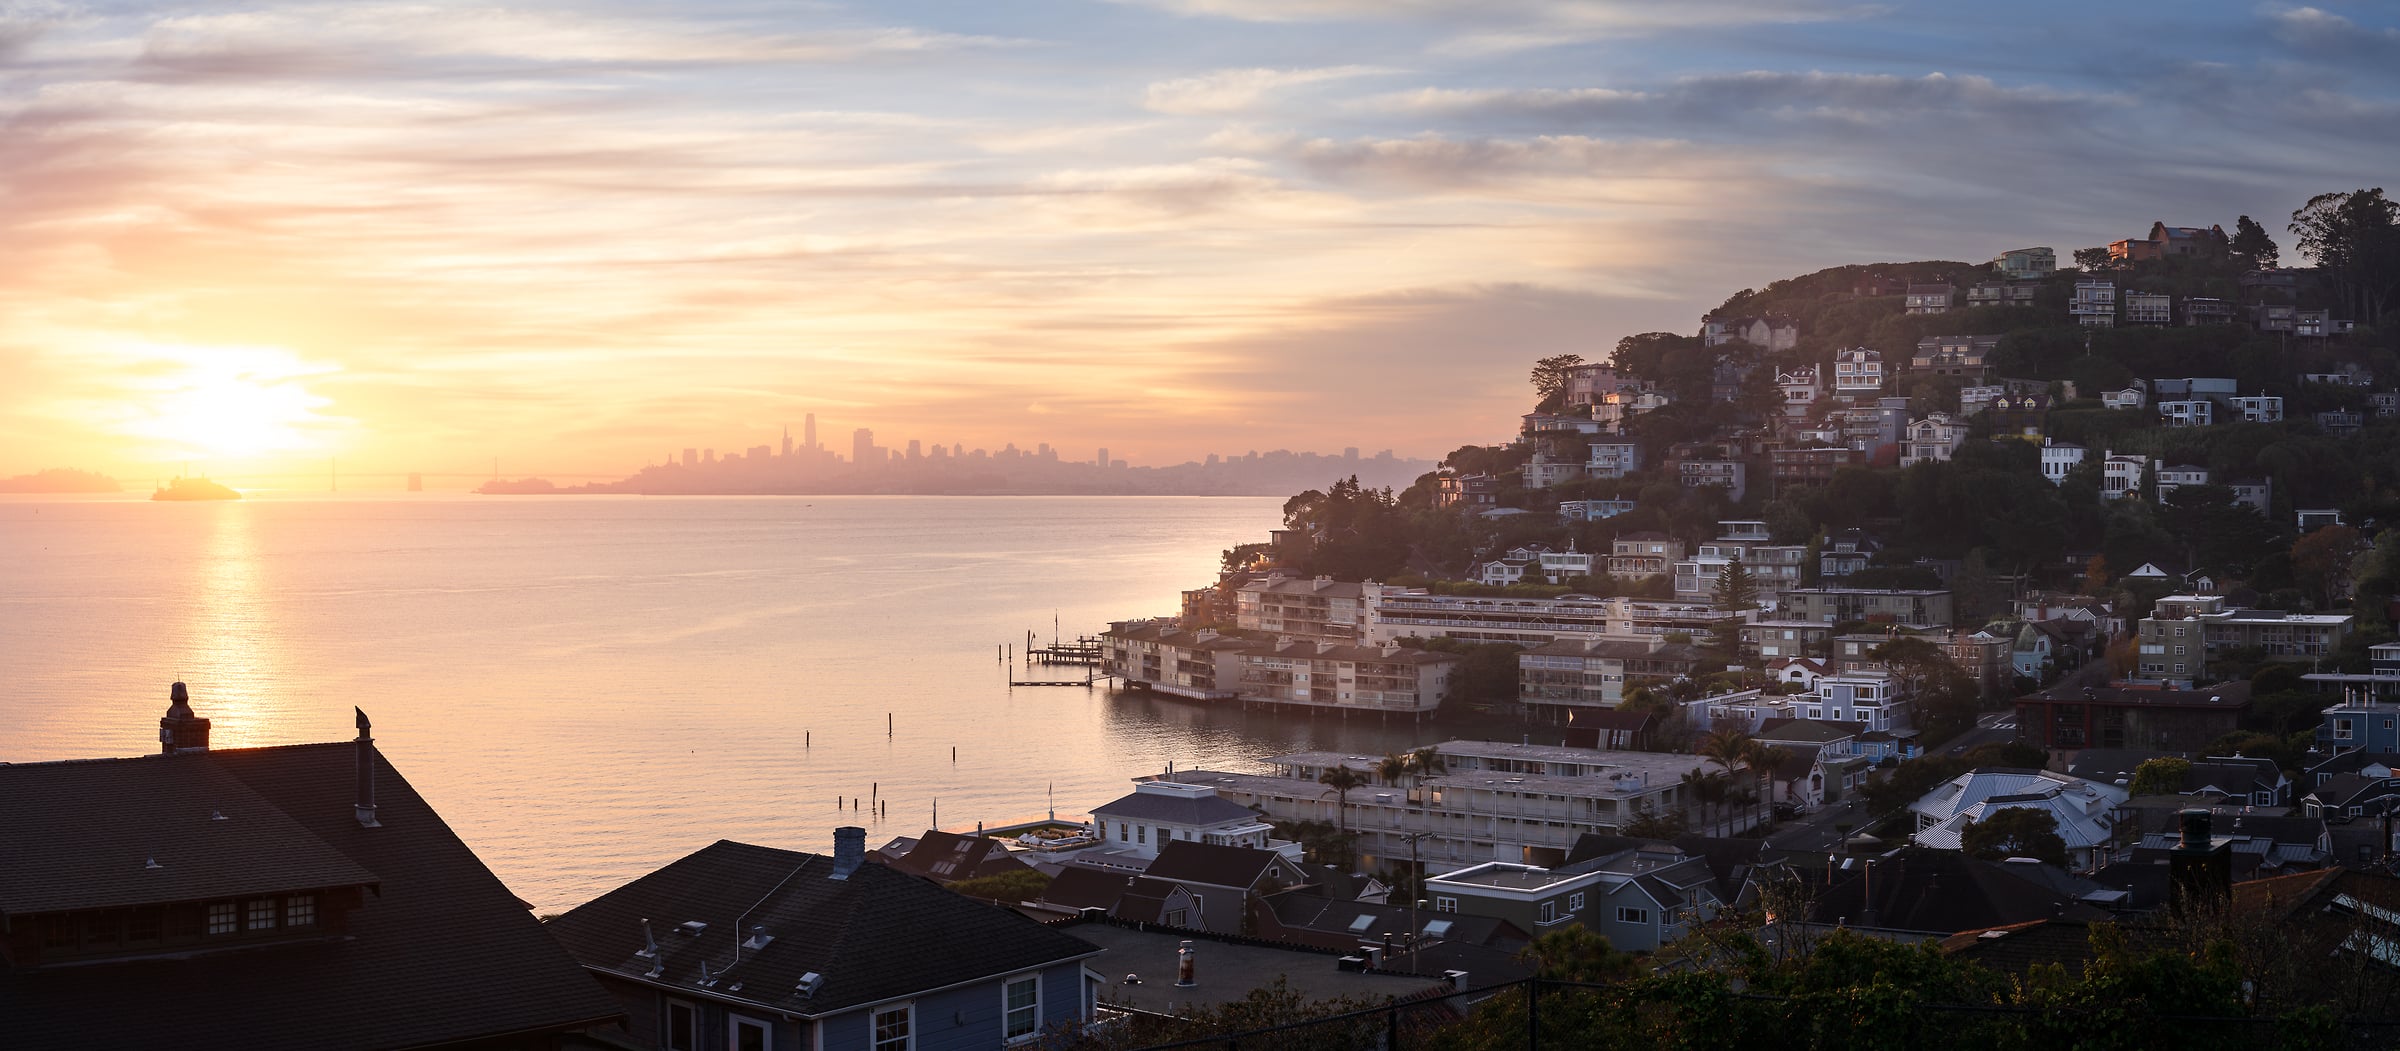 187 megapixels! A very high resolution, large-format VAST photo print of the Sausalito, California waterfront at sunrise with the San Francisco Bay and the San Francisco skyline in the background; fine art photograph created by Jeff Lewis in Sausalito, California.